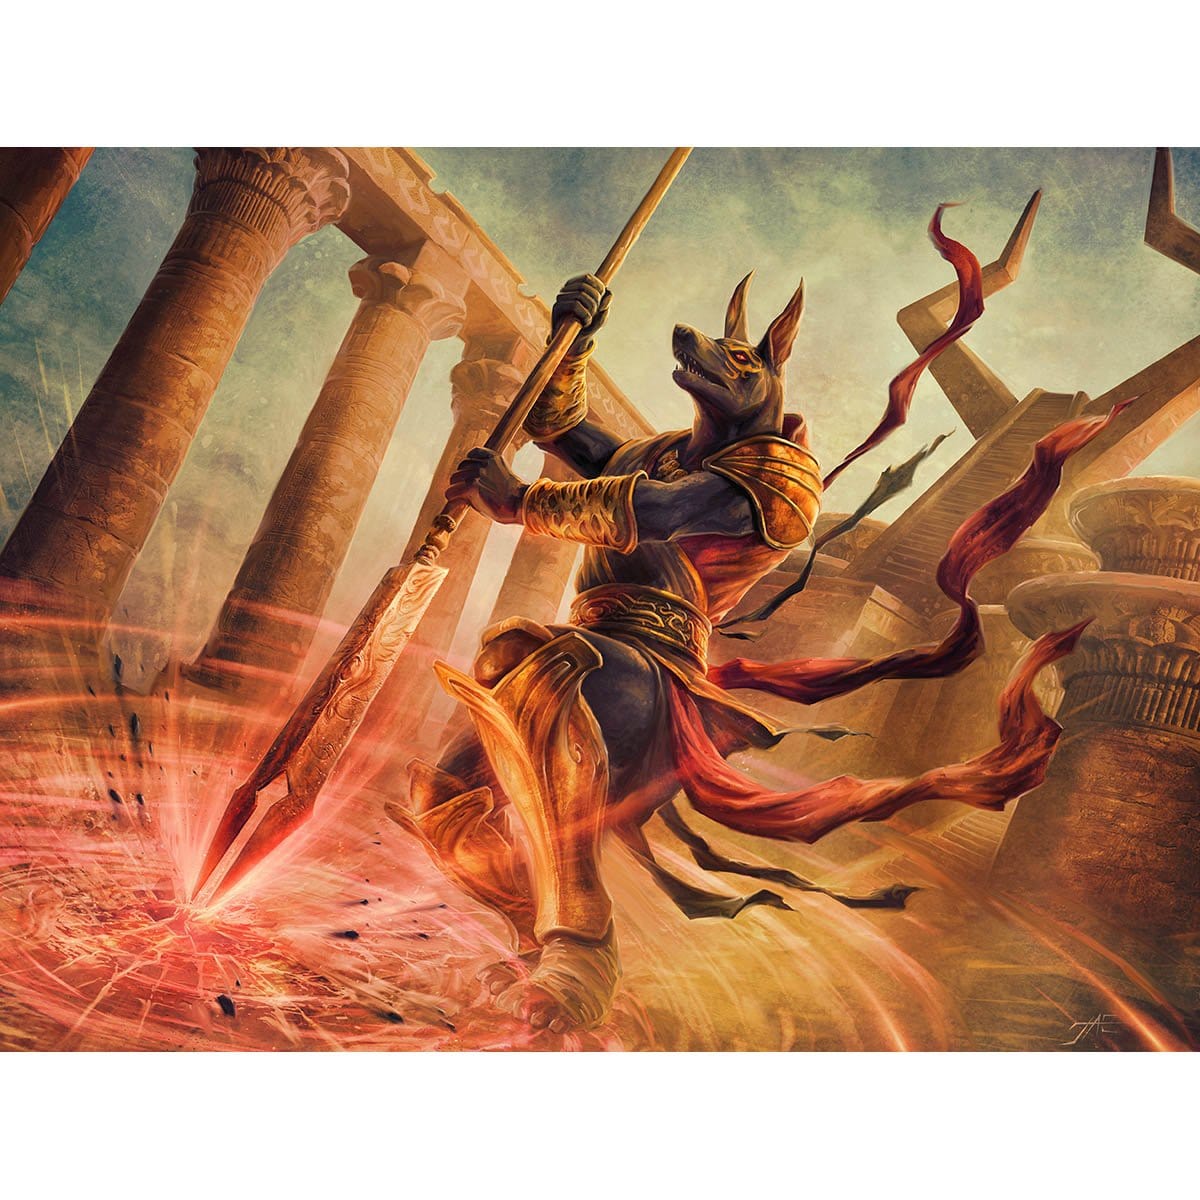 Earthshaker Khenra Print - Print - Original Magic Art - Accessories for Magic the Gathering and other card games